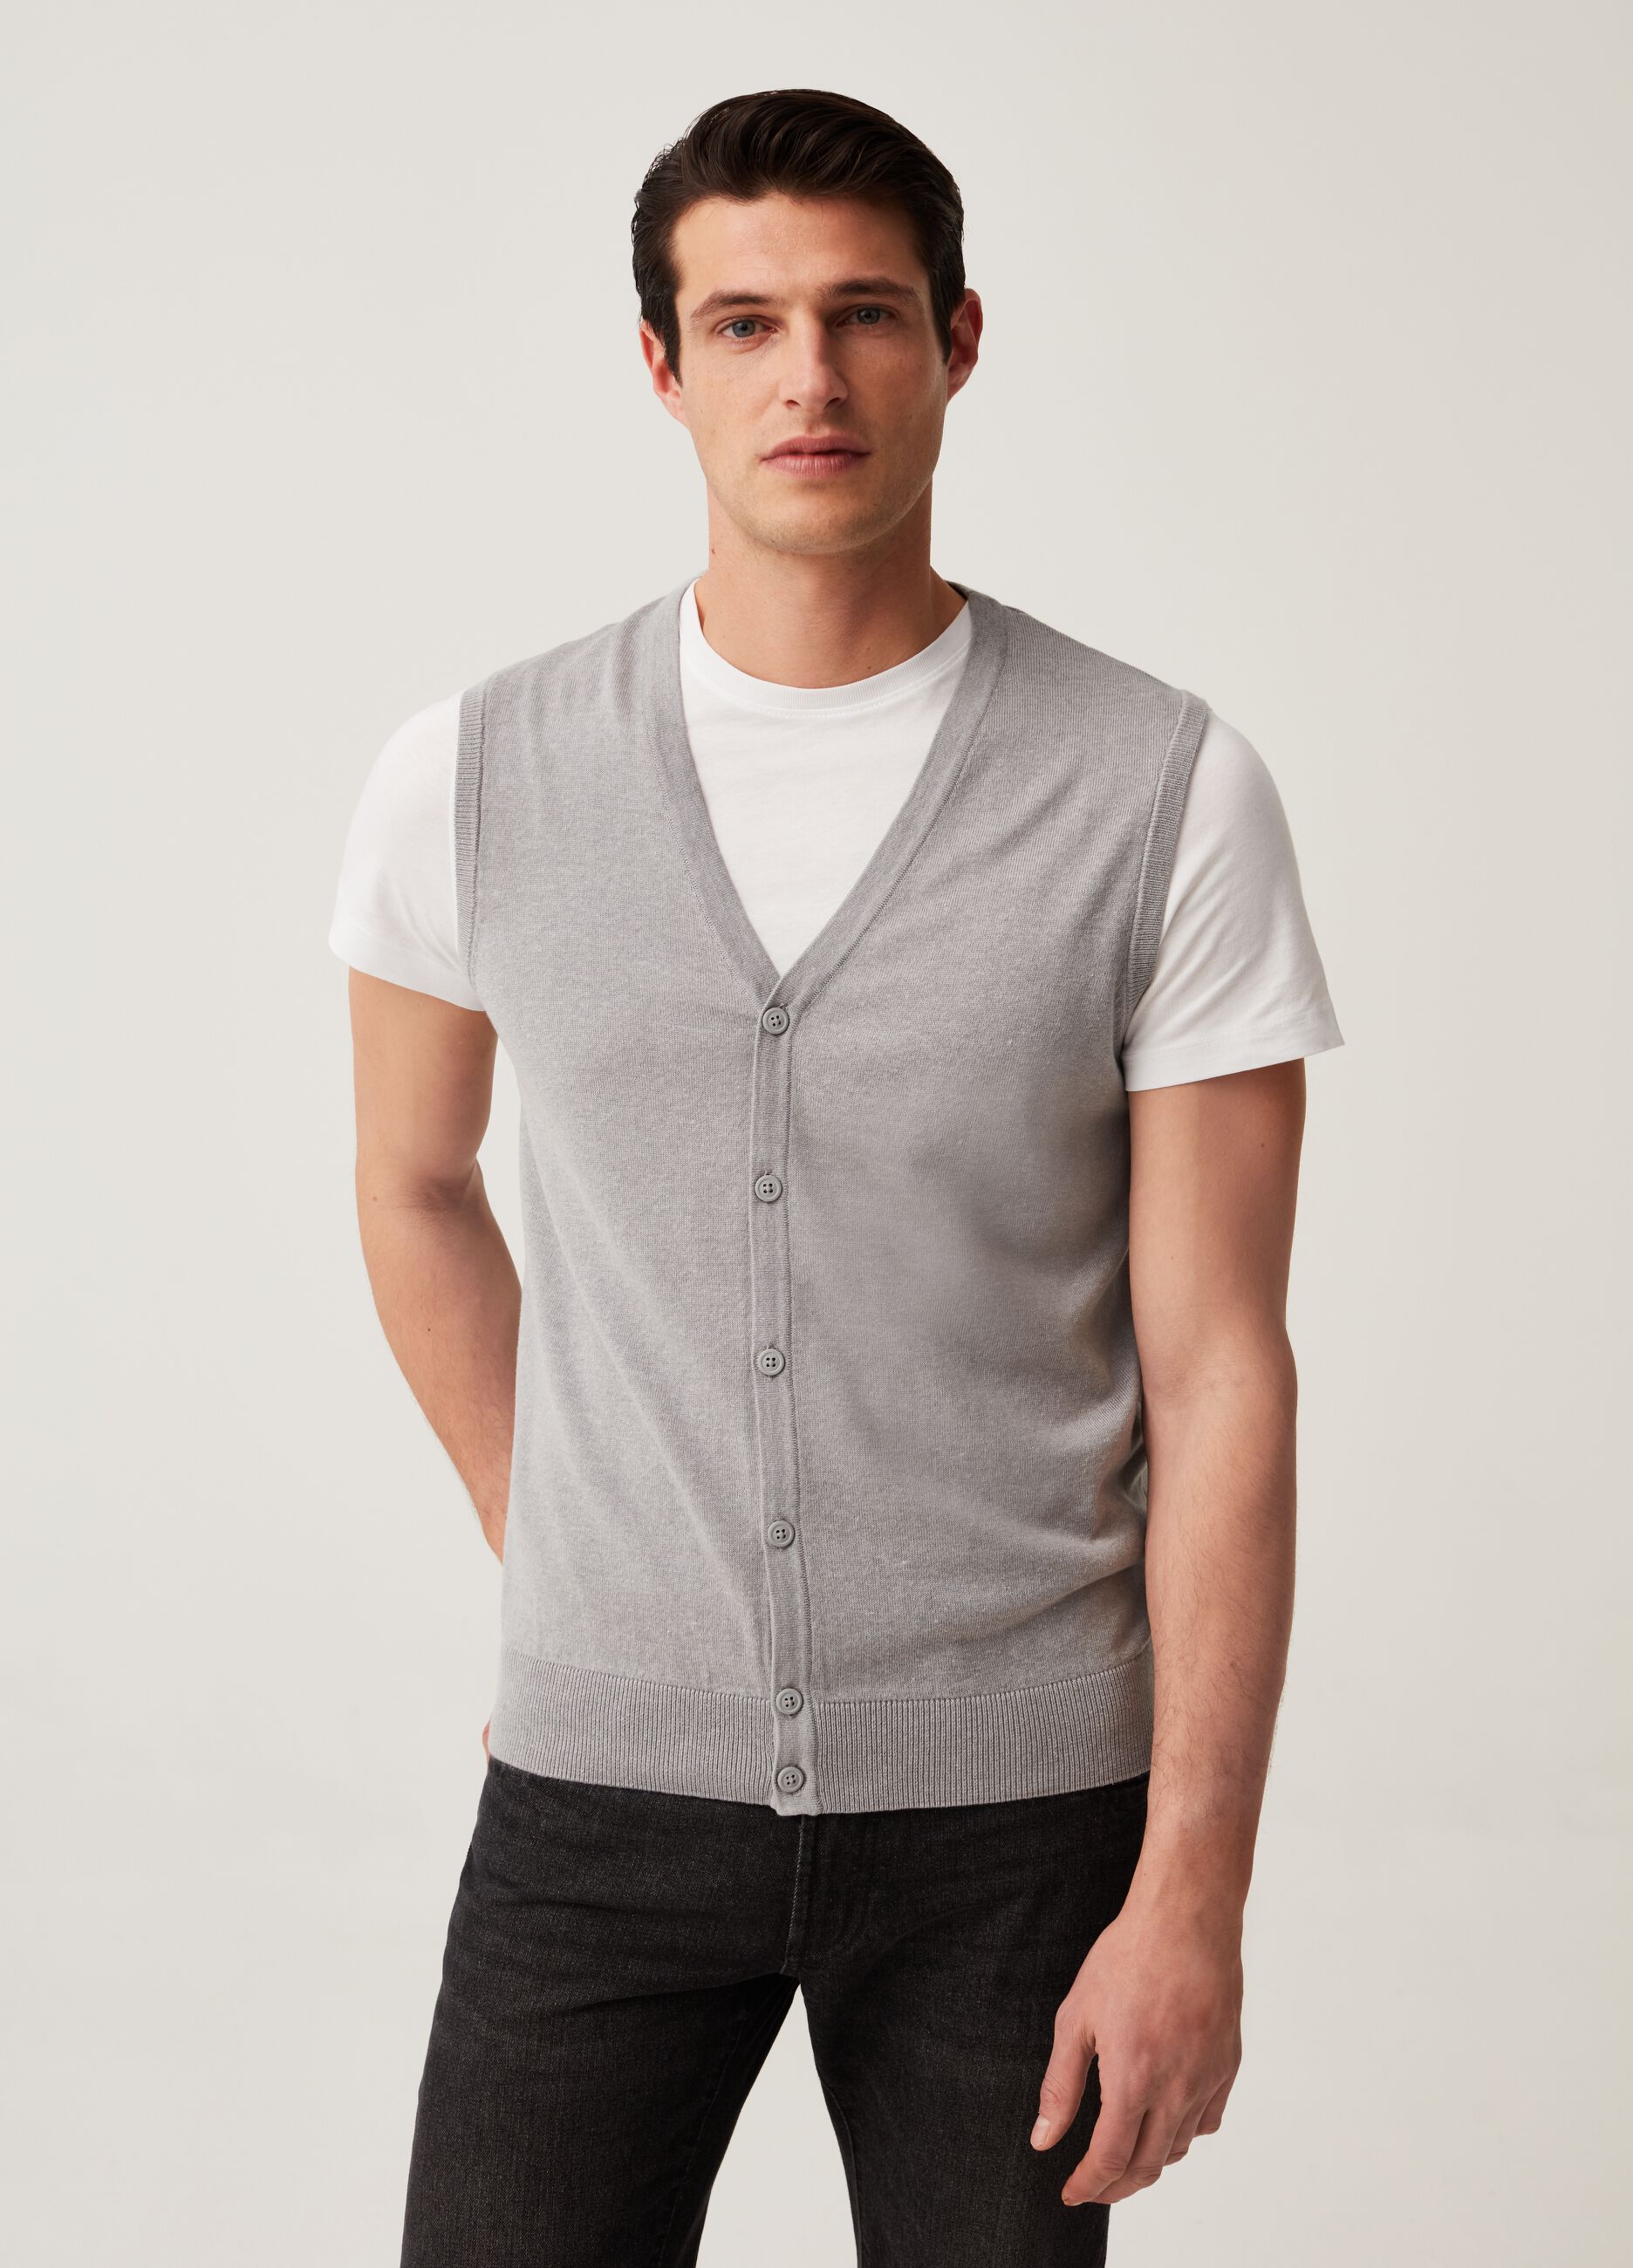 Waistcoat top with V neck and buttons